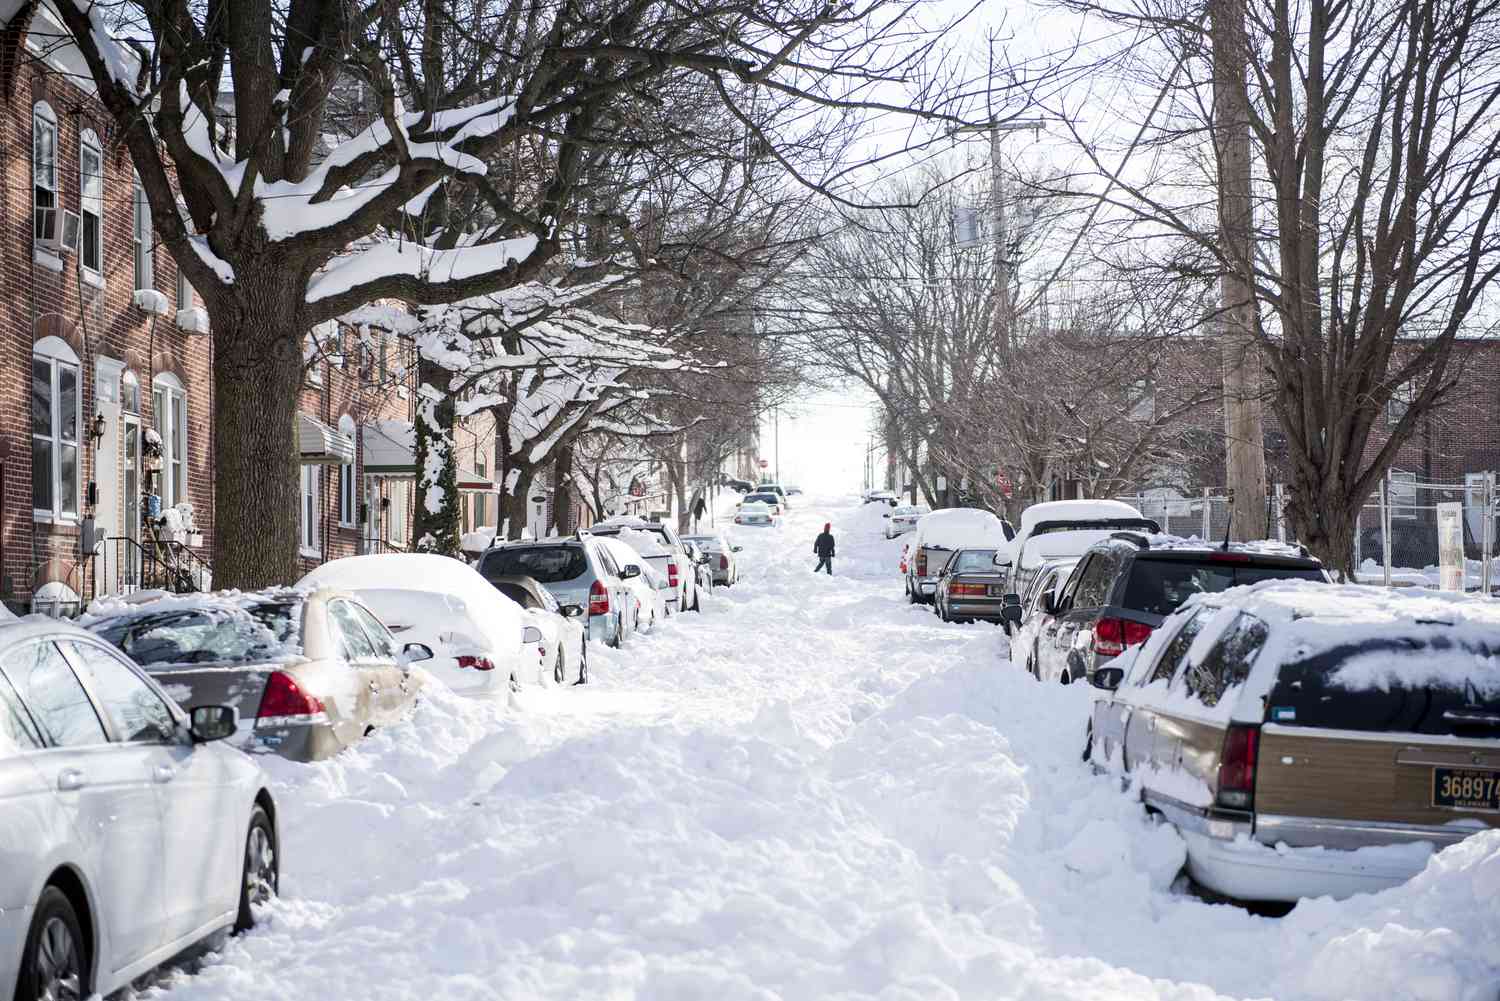 Snowstorm Safety Tips and Insights